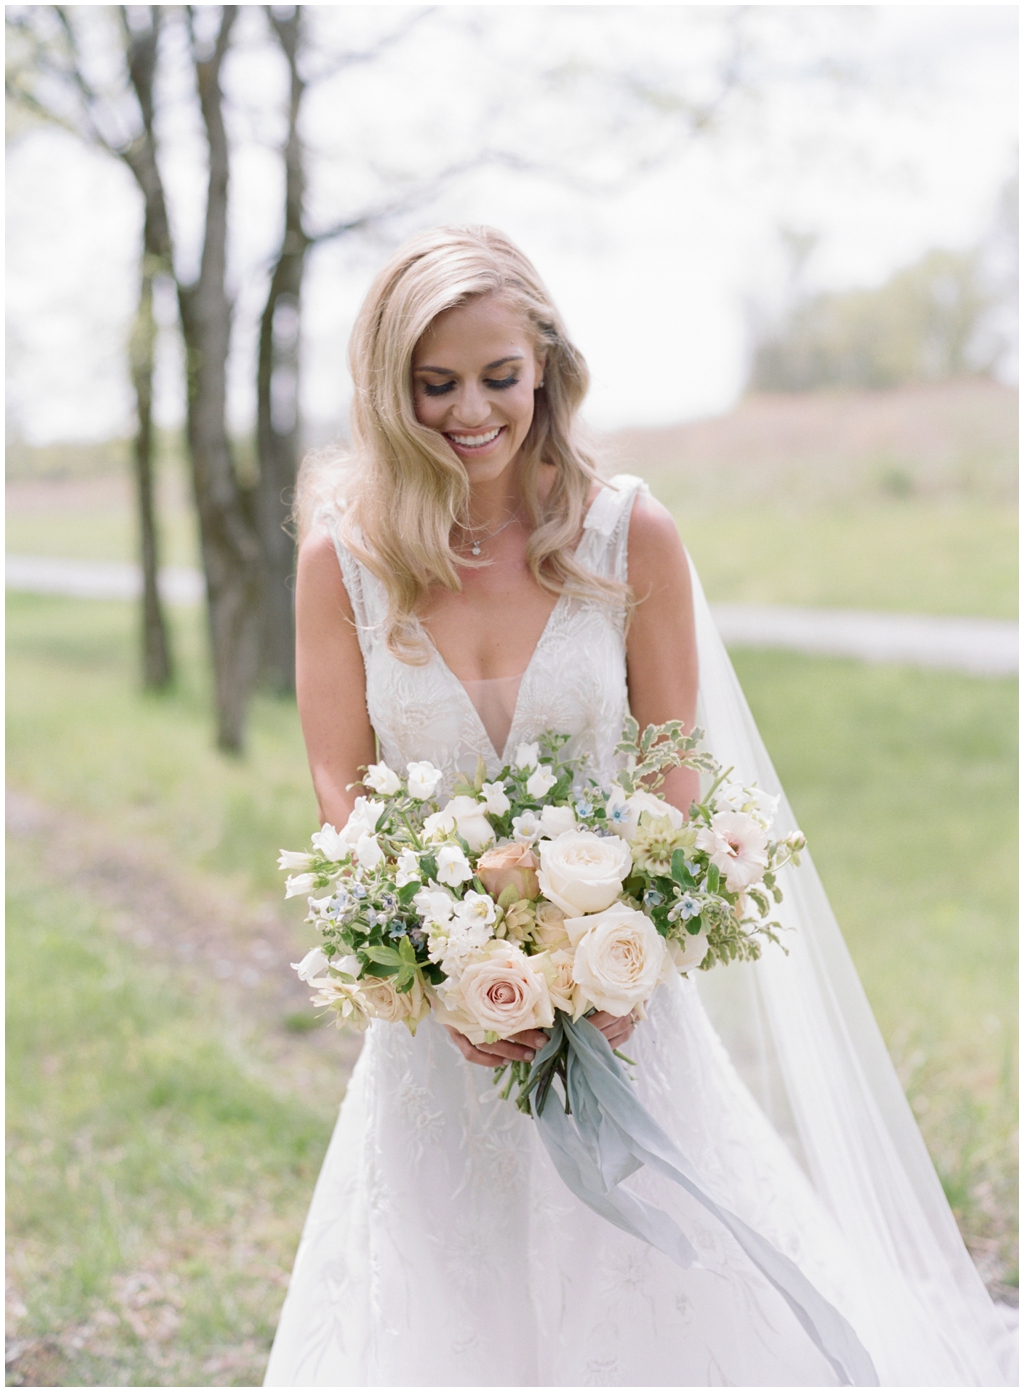 Charming neutral spring bridal bouquet by Thistle and Lace